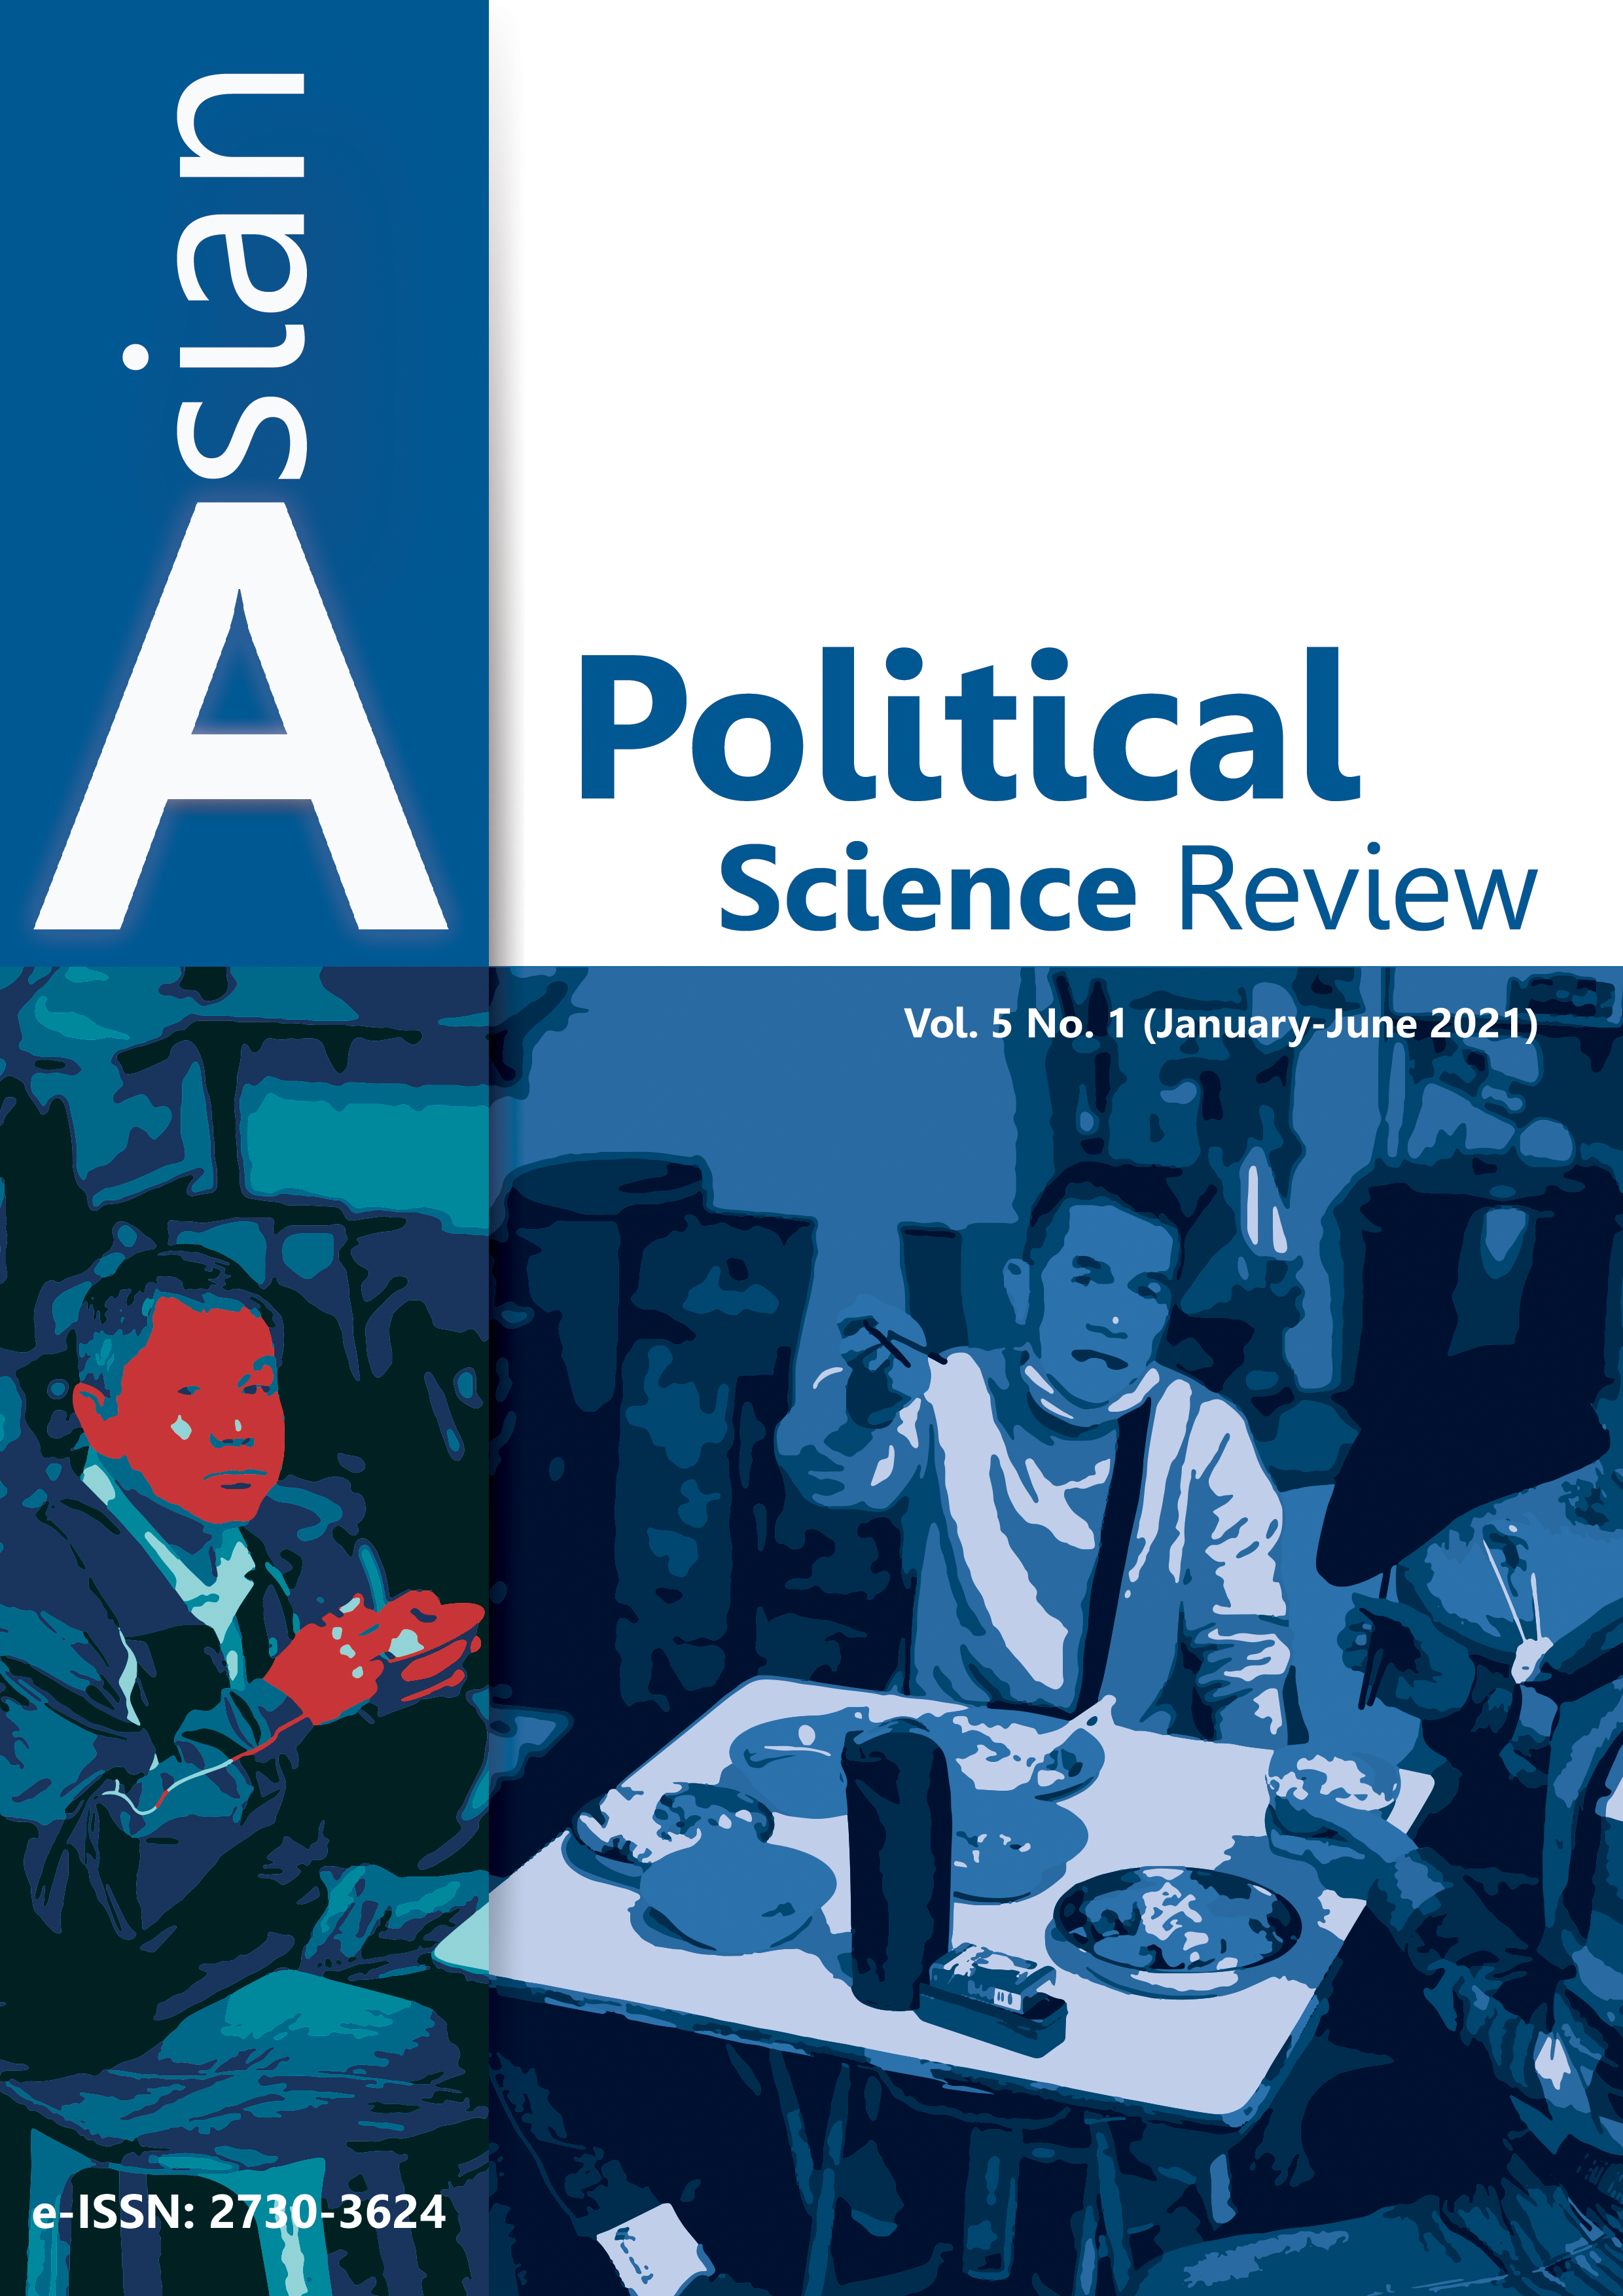 					View Vol. 5 No. 1 (2021): Asian Political Science Review
				